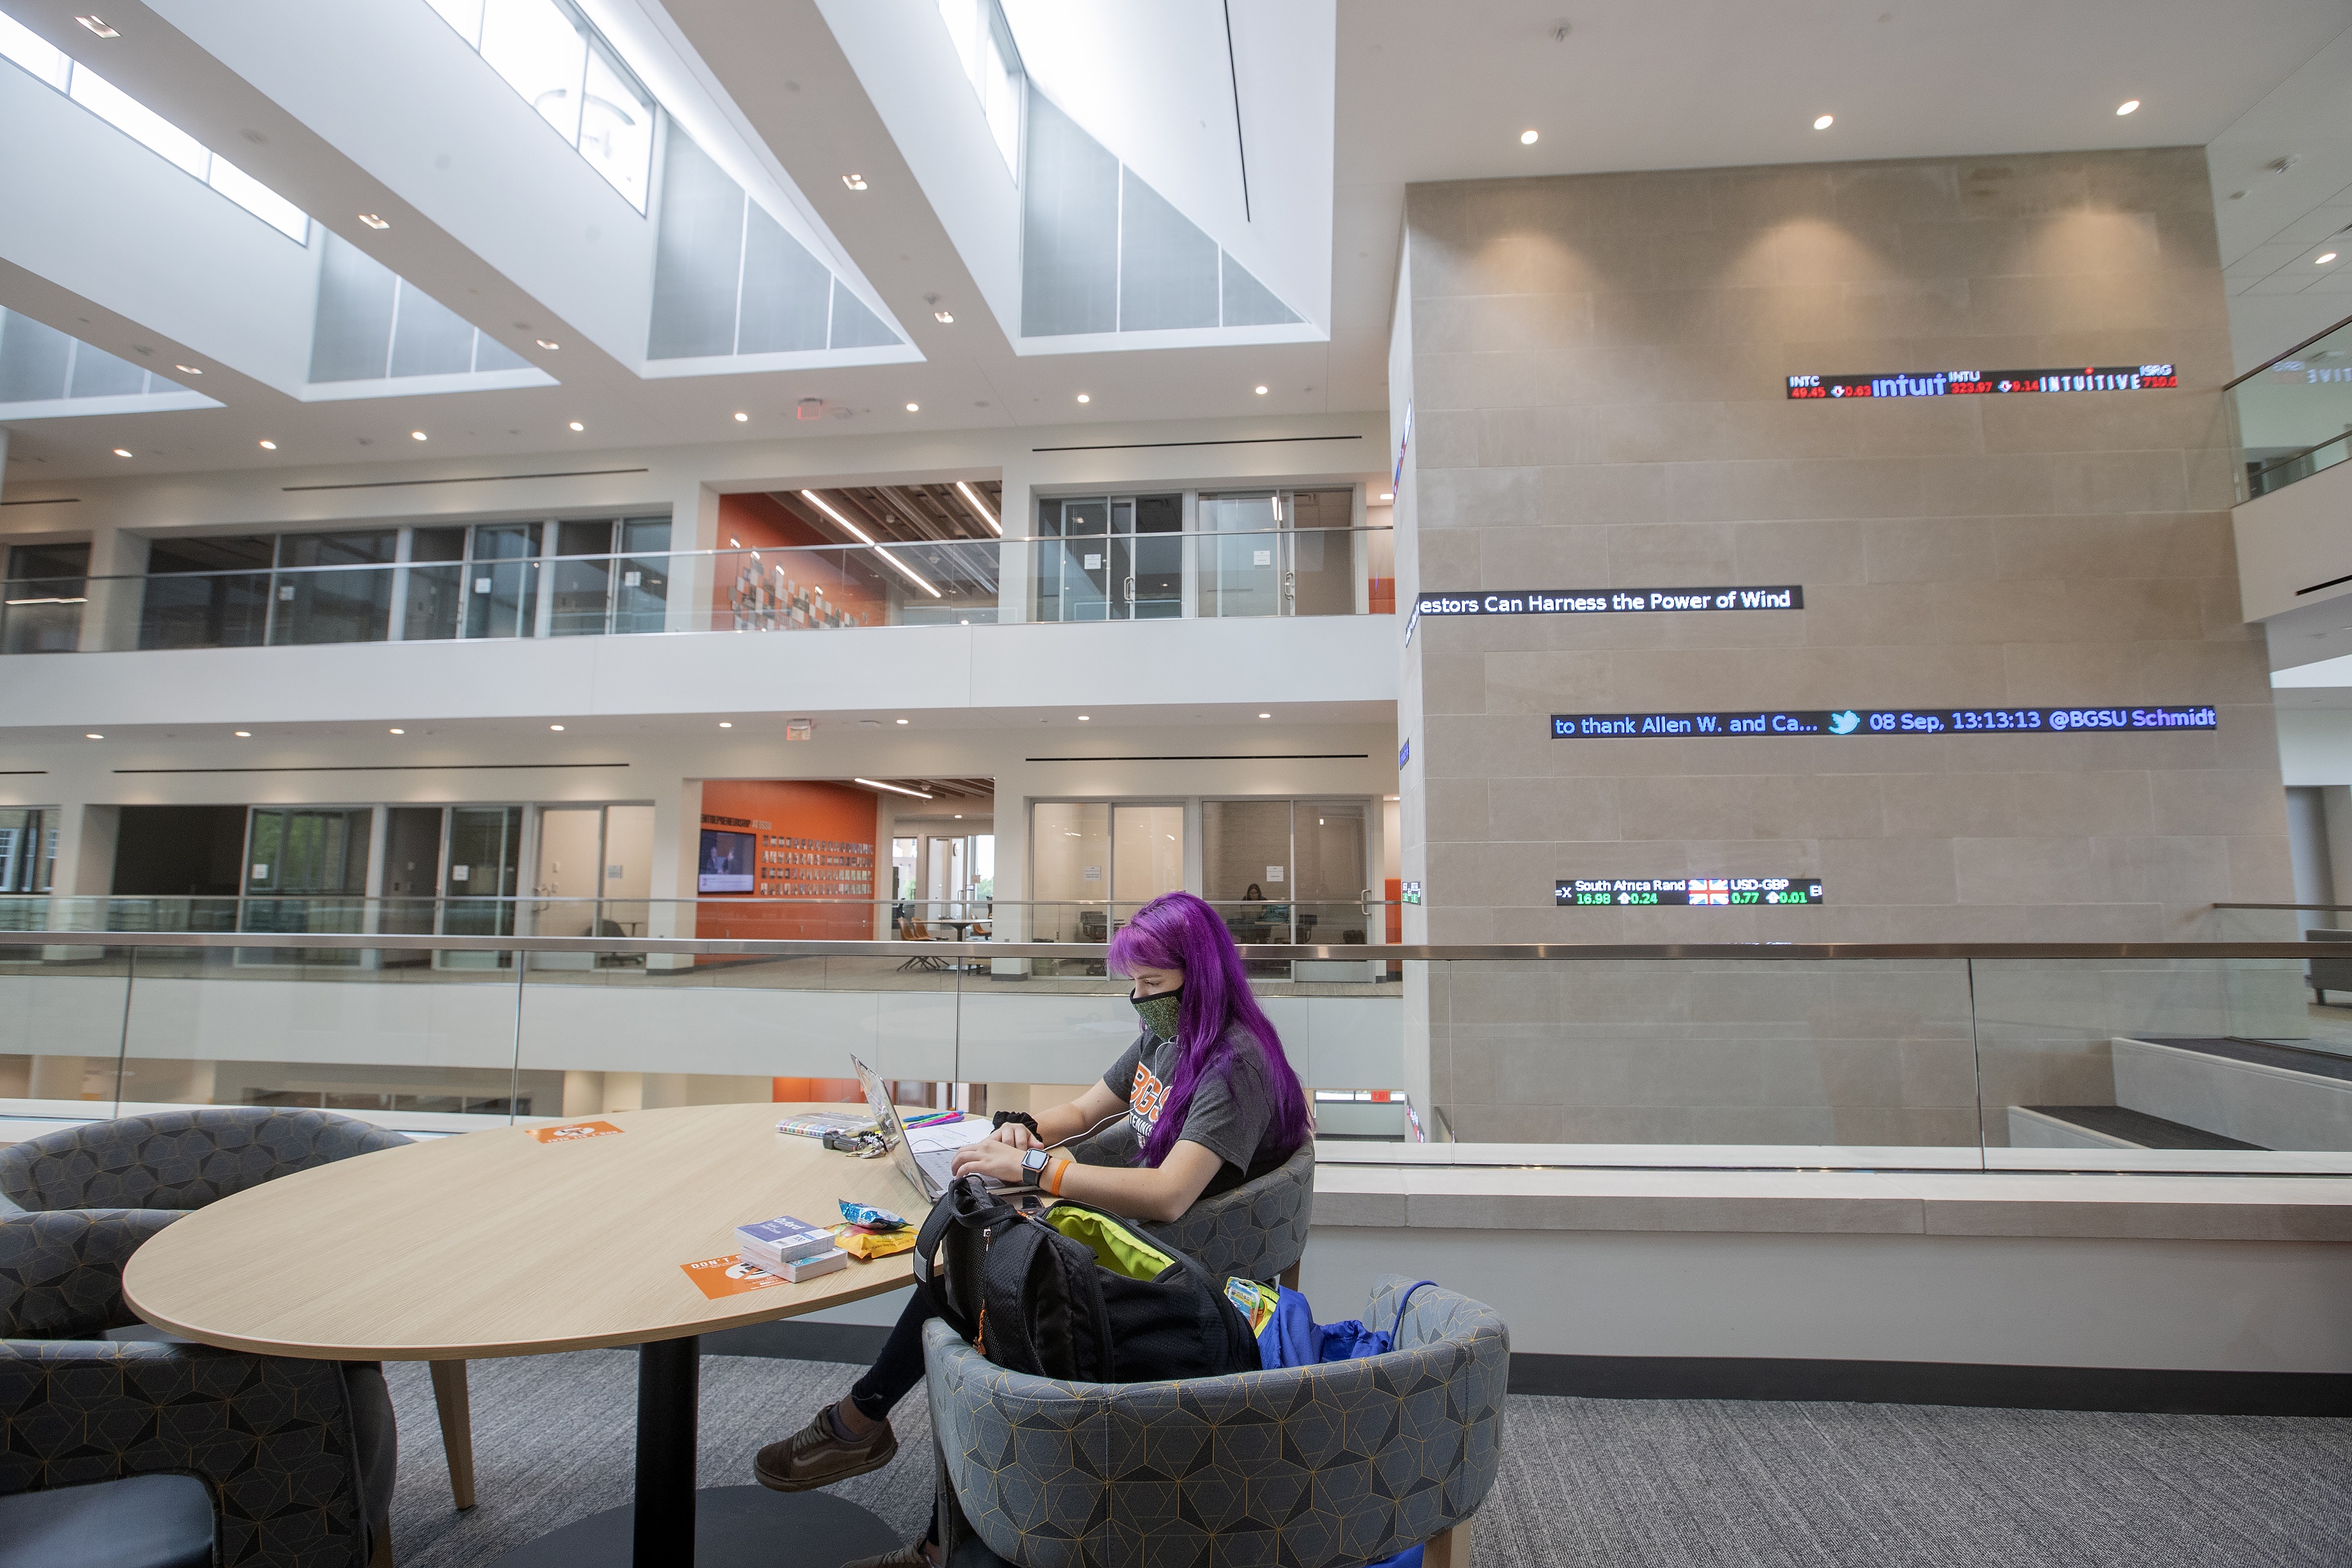 Hope Chaffin, a first-year student from Reynoldsburg, Ohio, studies in the Allen A. and Mary D. Green Mezzanine.